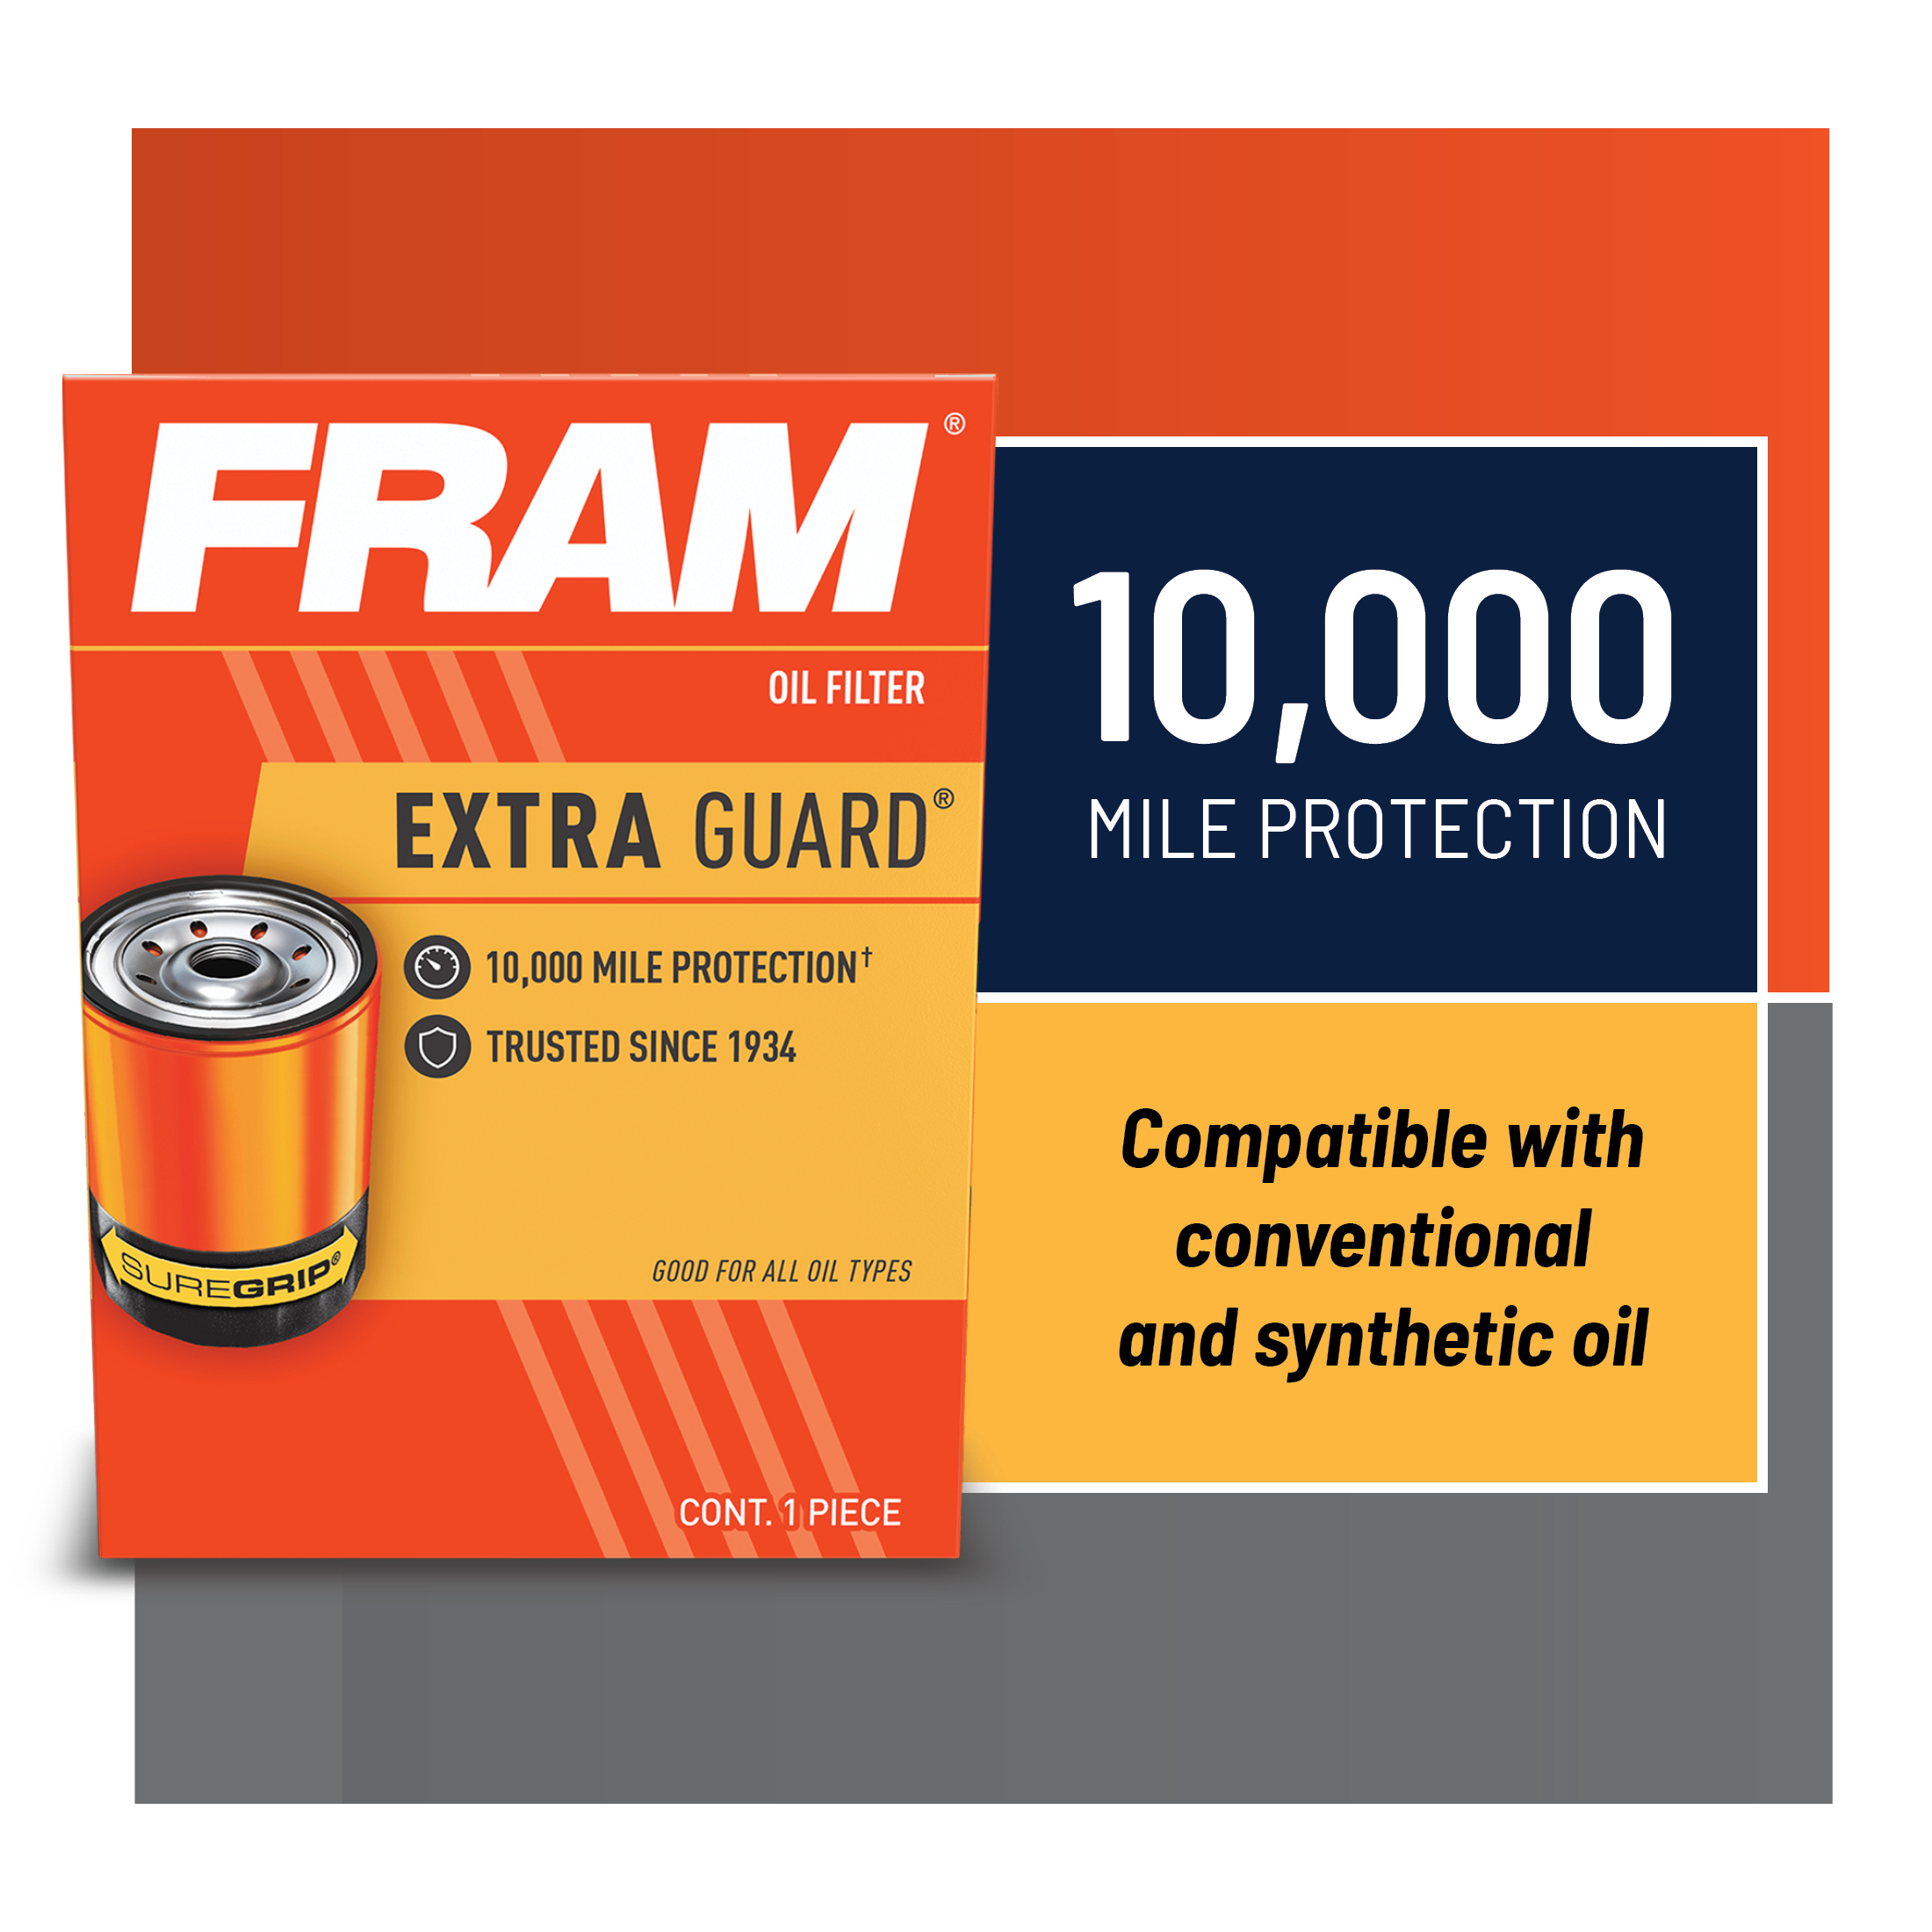 FRAM Extra Guard Oil Filter, PH7317, 10K mile Replacement Oil Filter - image 5 of 10